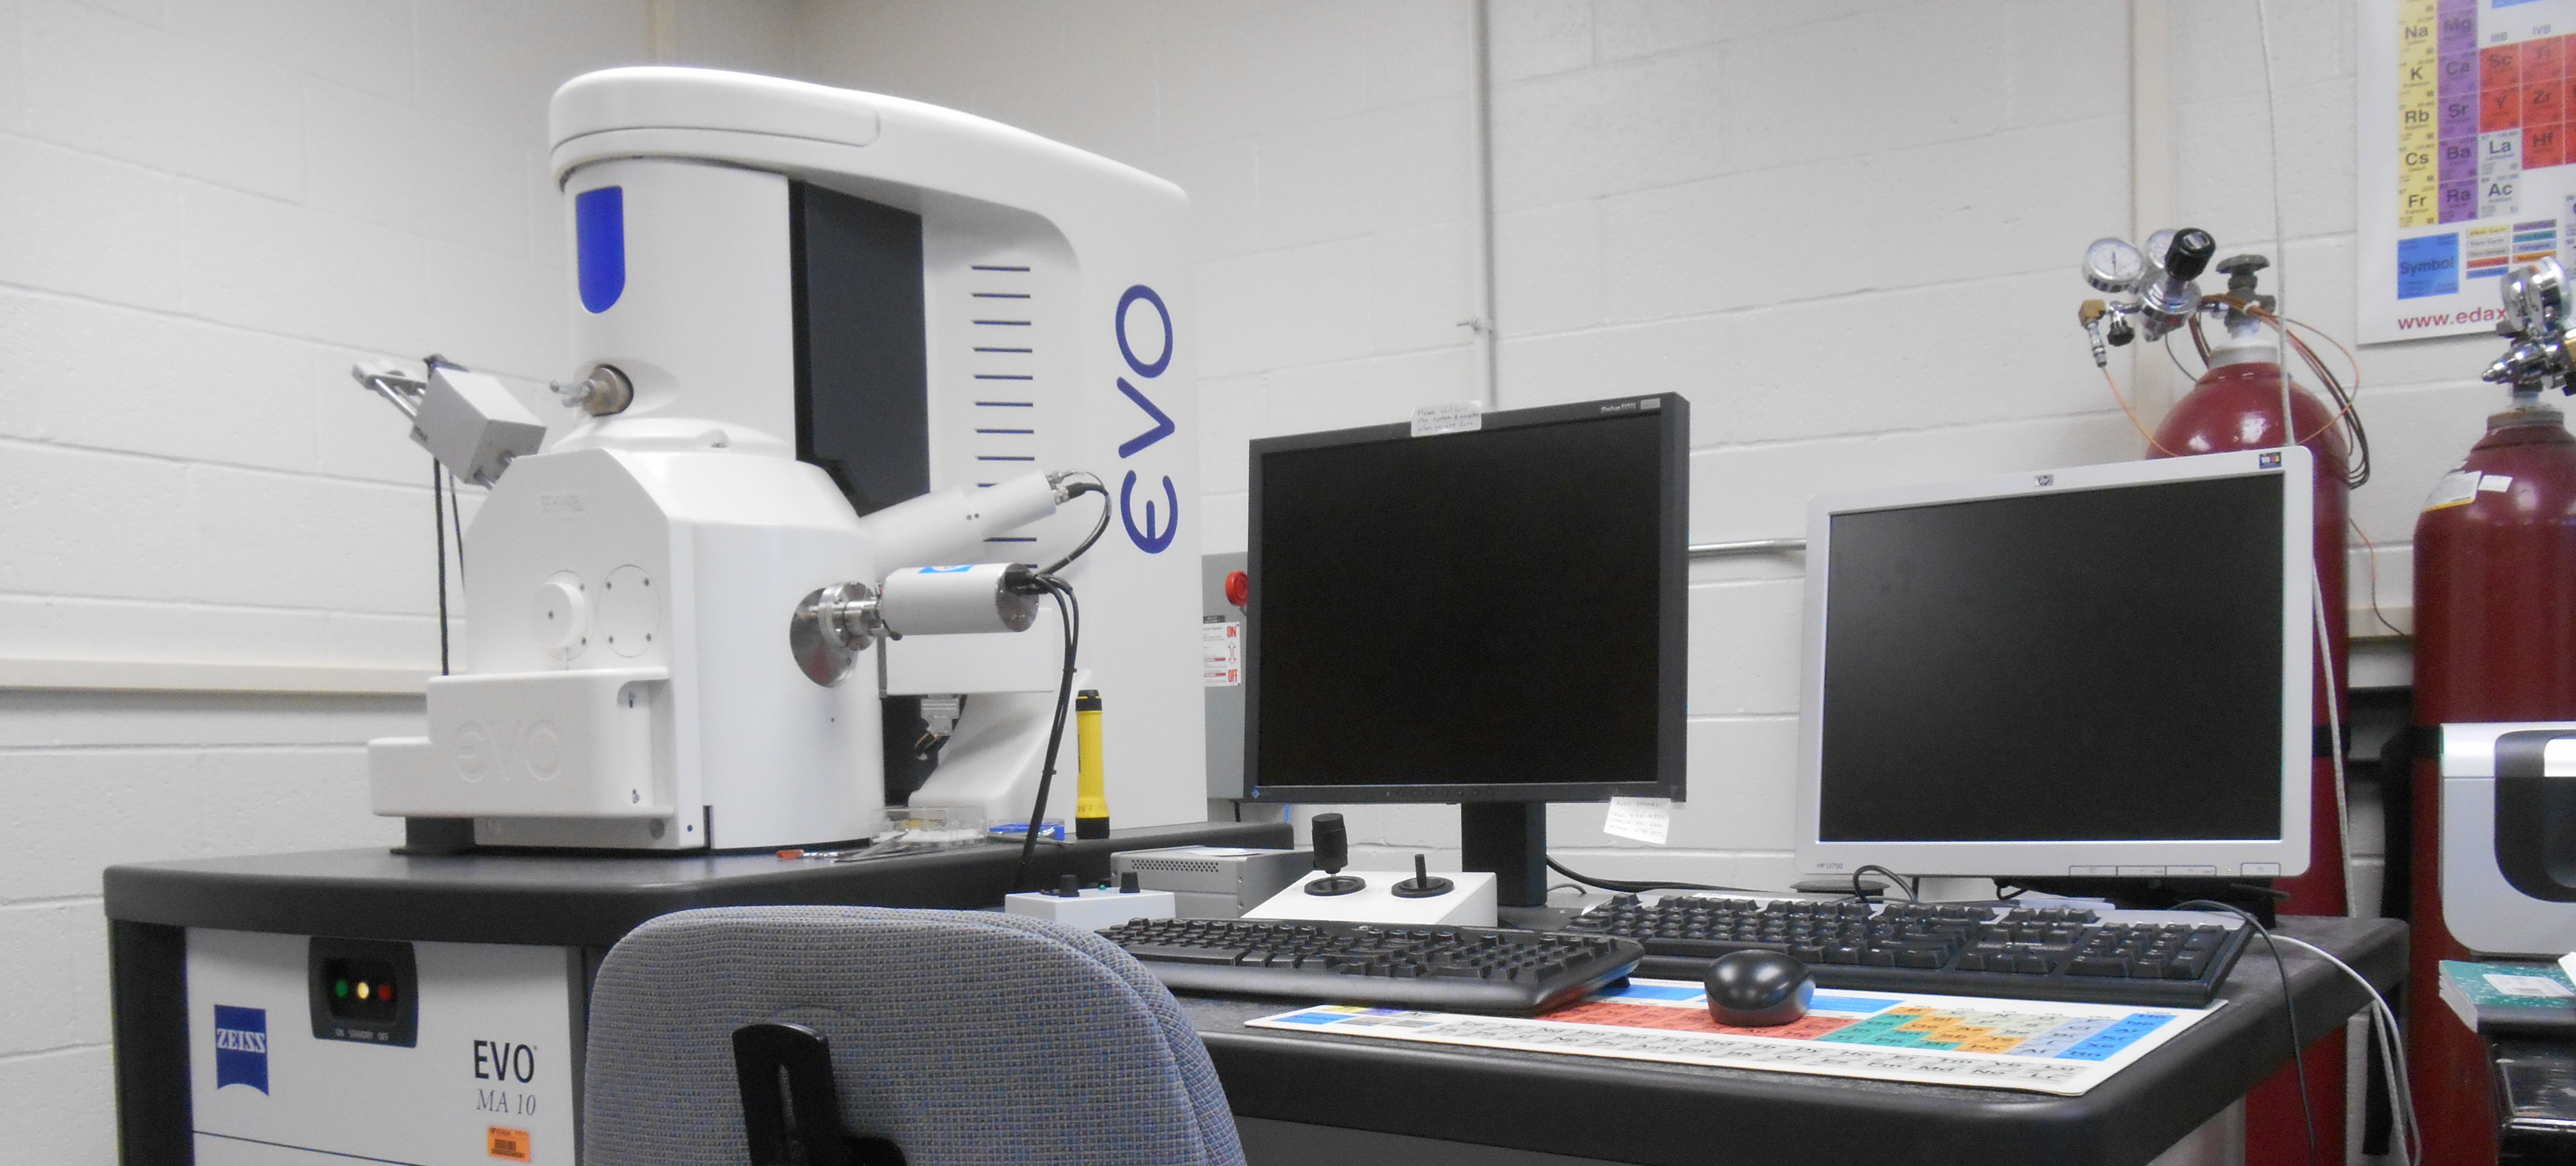 engine cave Discover Scanning Electron Microscope – Department of Geological Sciences